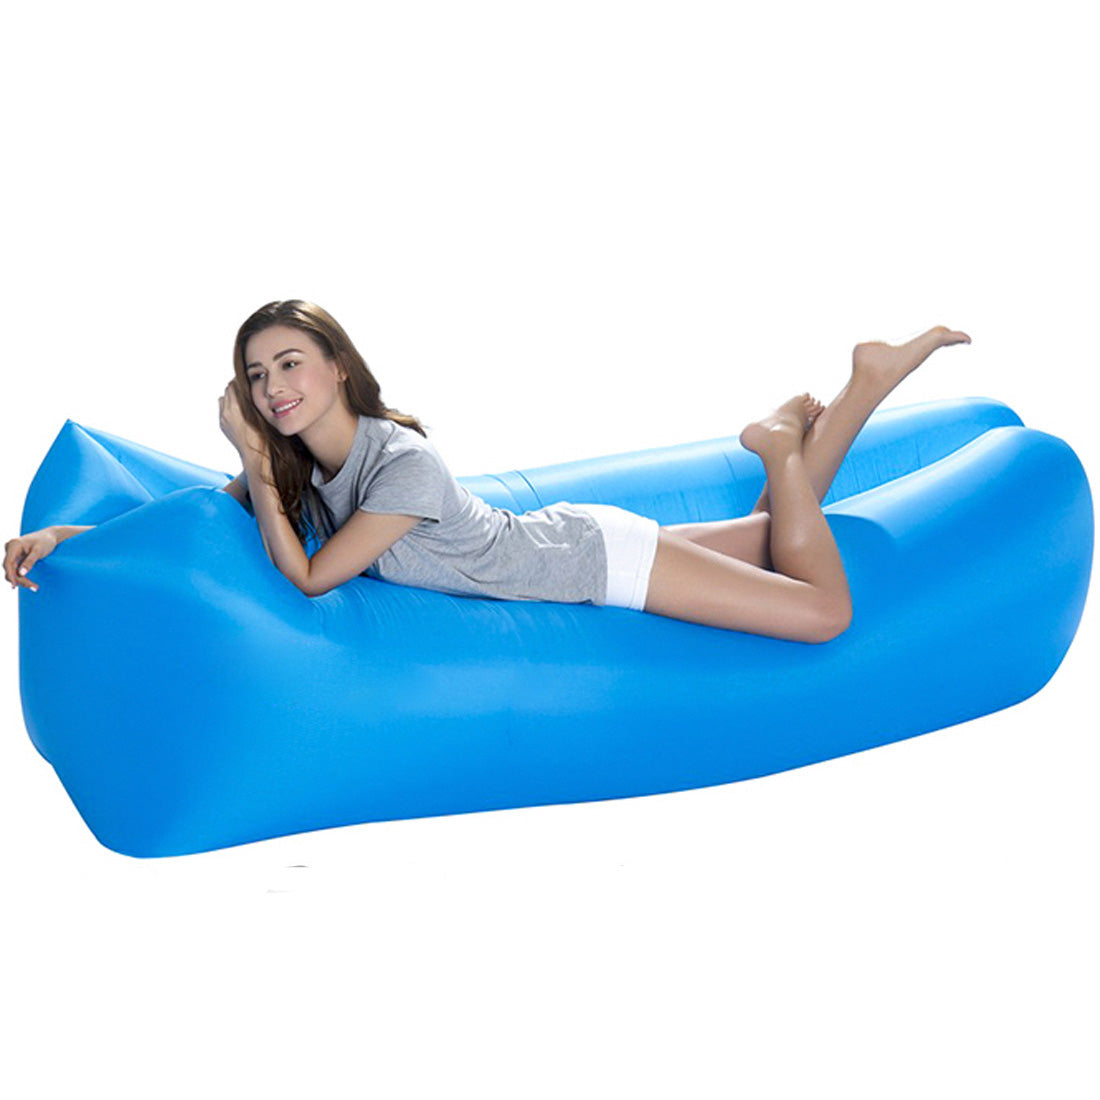 IPRee® Square-headed Air Inflatable Lazy Sofa 210D Oxford Portable Travel Lay Bed Lounger Max Load 200kg 